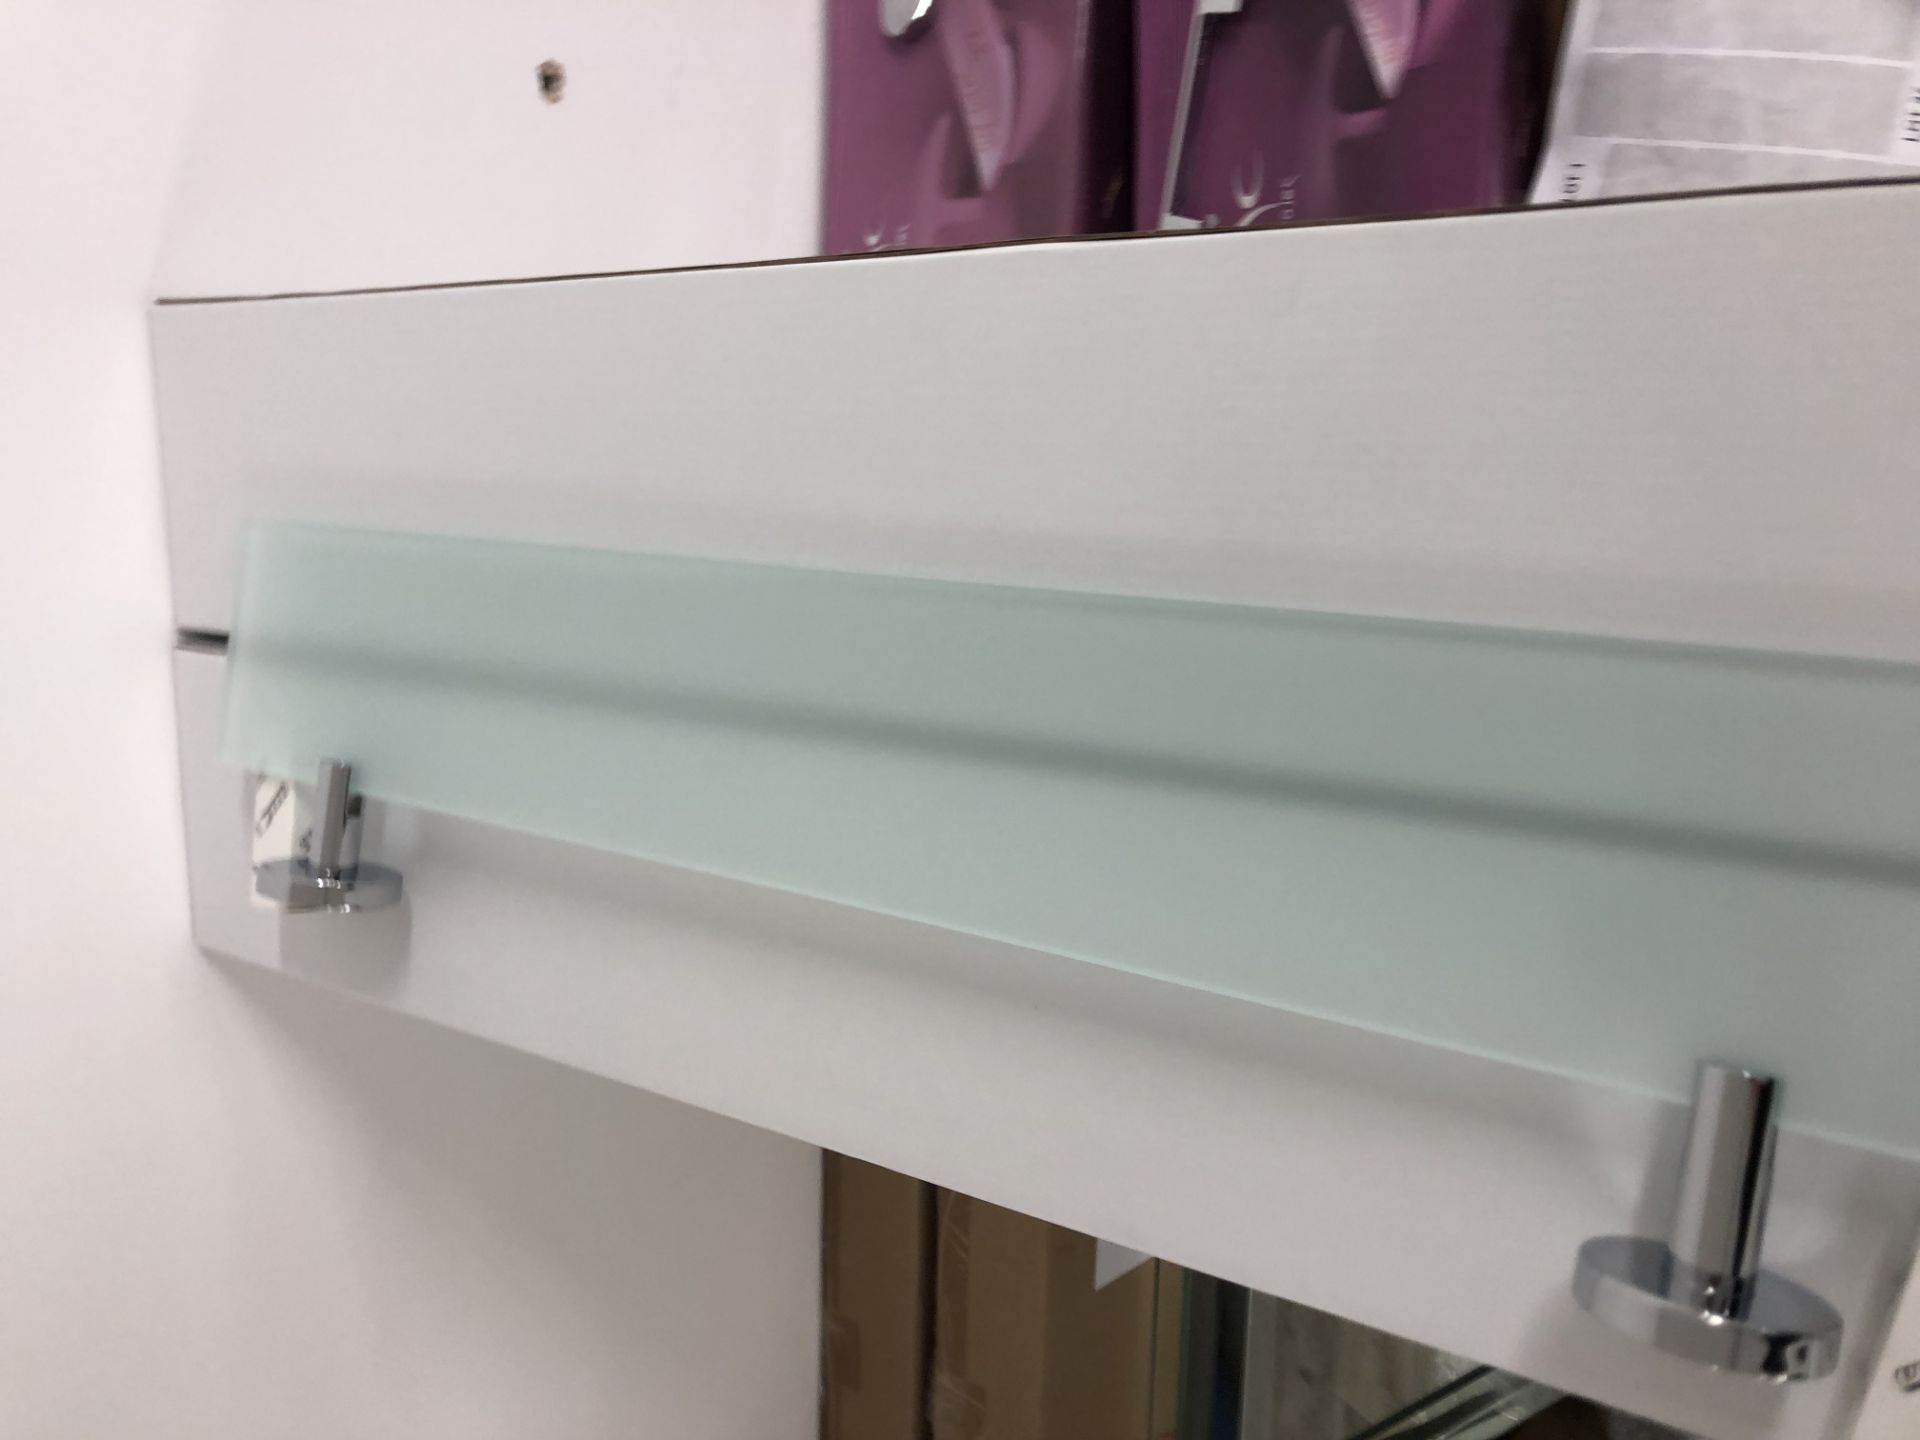 BNIB DESIGNER CHROME AND FROSTED GLASS BATHROOM 600MM SHELF AND FITTINGS £59 - Image 3 of 3